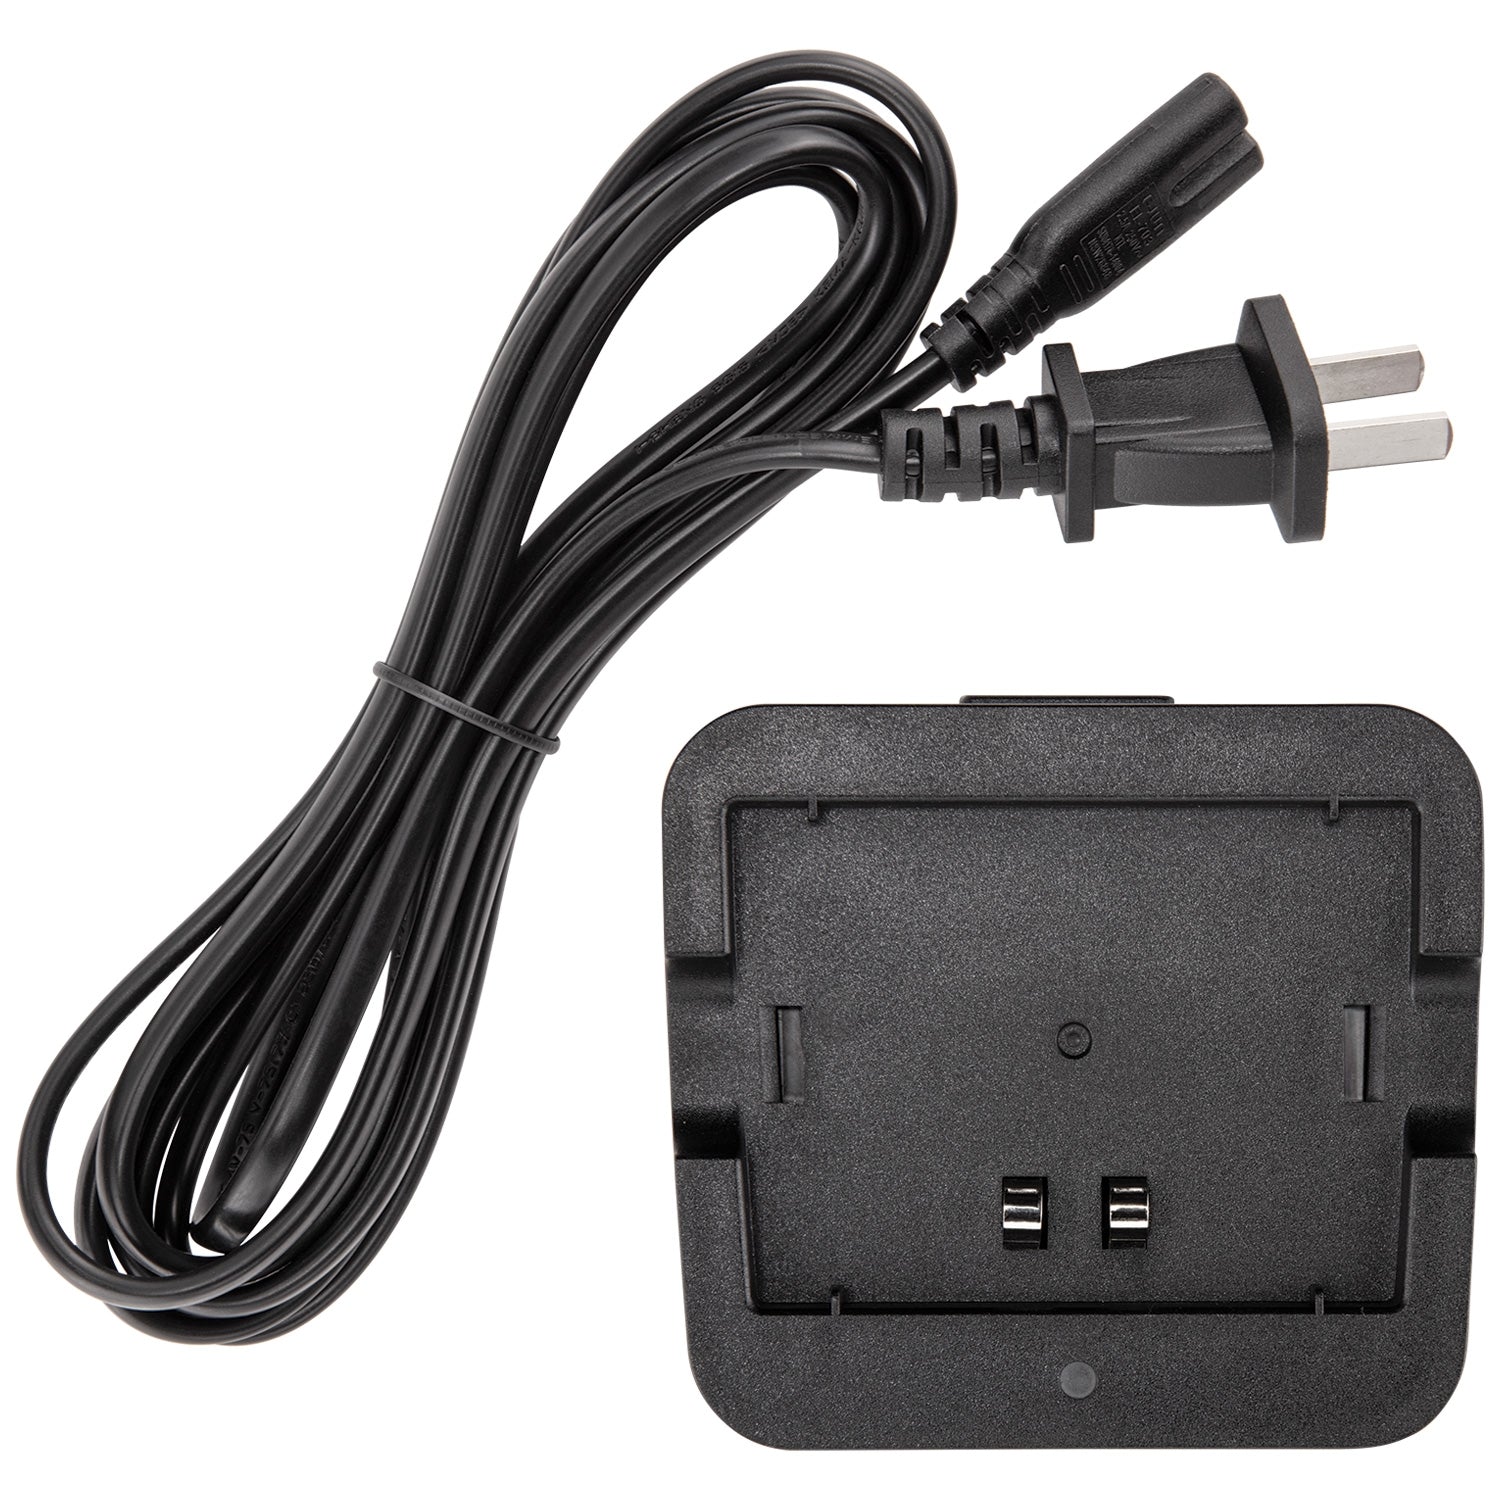 FJ80 Battery Charger and Cord